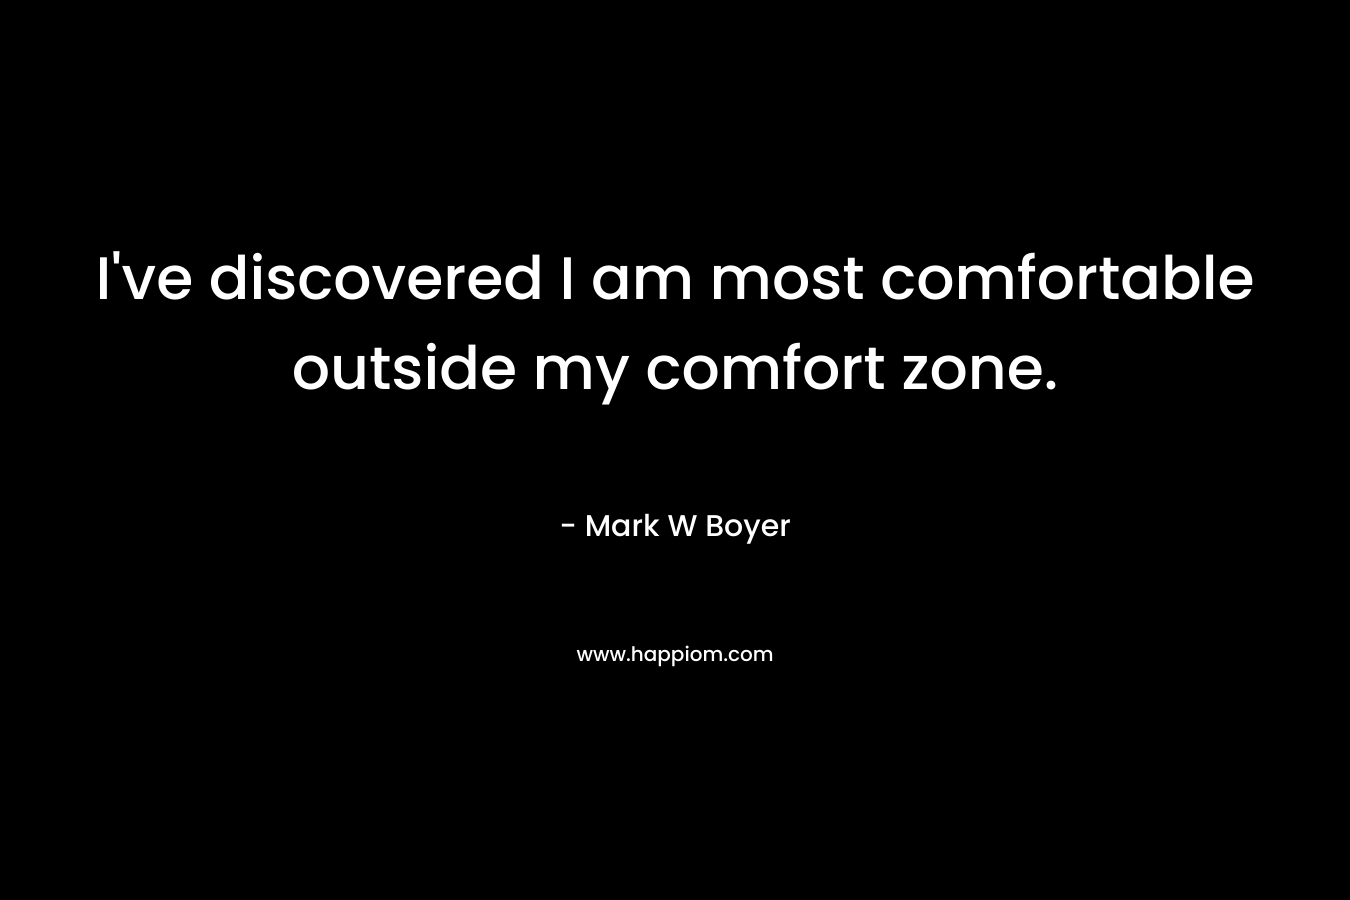 I've discovered I am most comfortable outside my comfort zone.